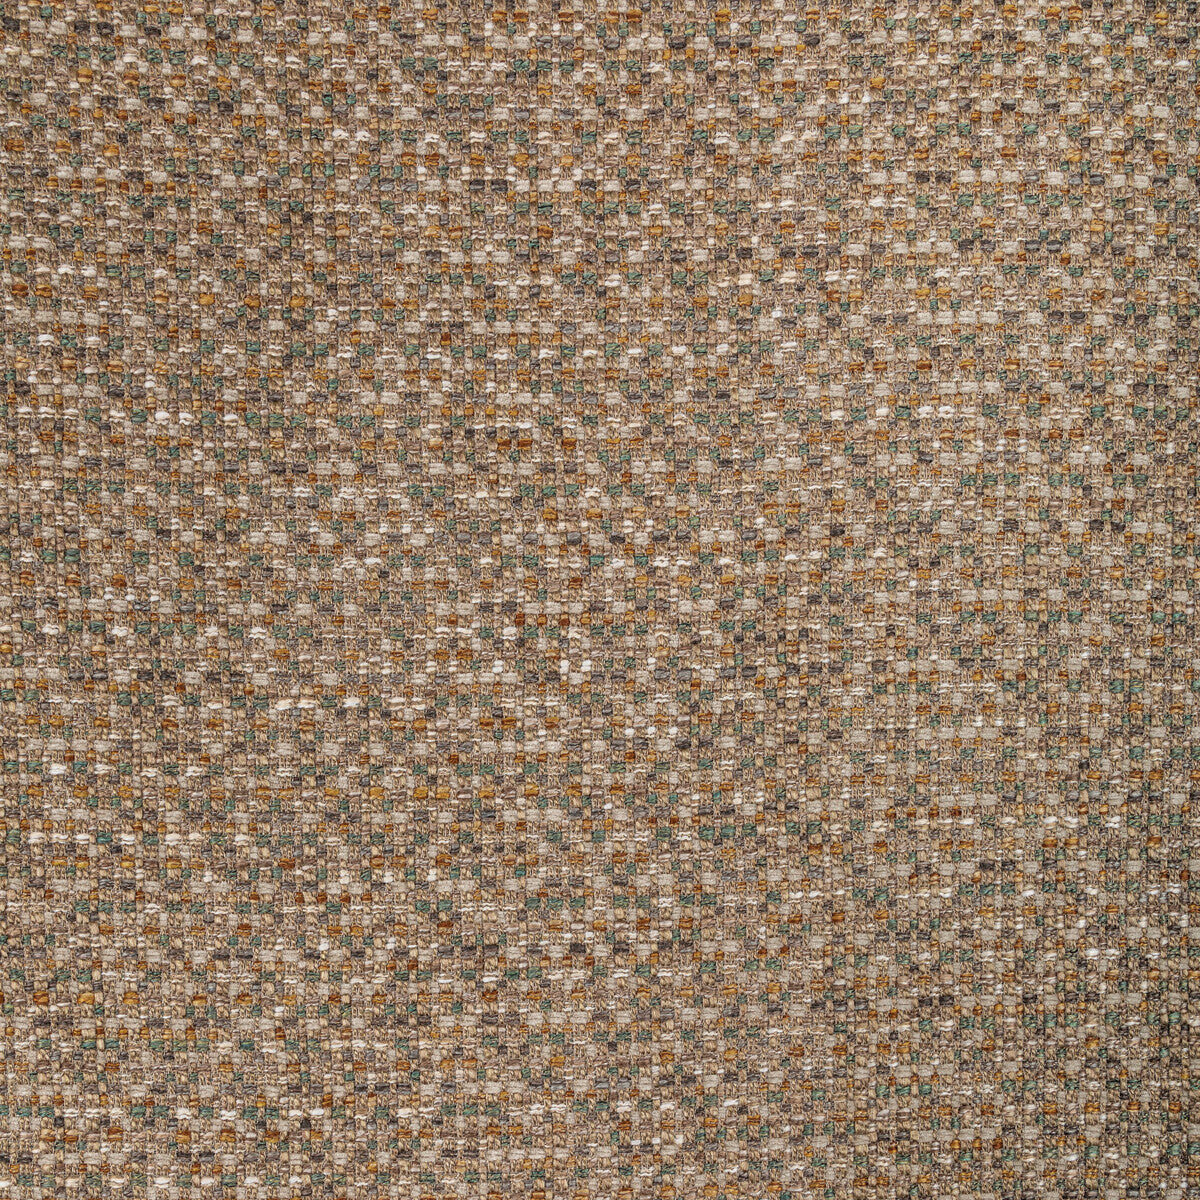 Remo fabric in nugget color - pattern 36324.630.0 - by Kravet Contract